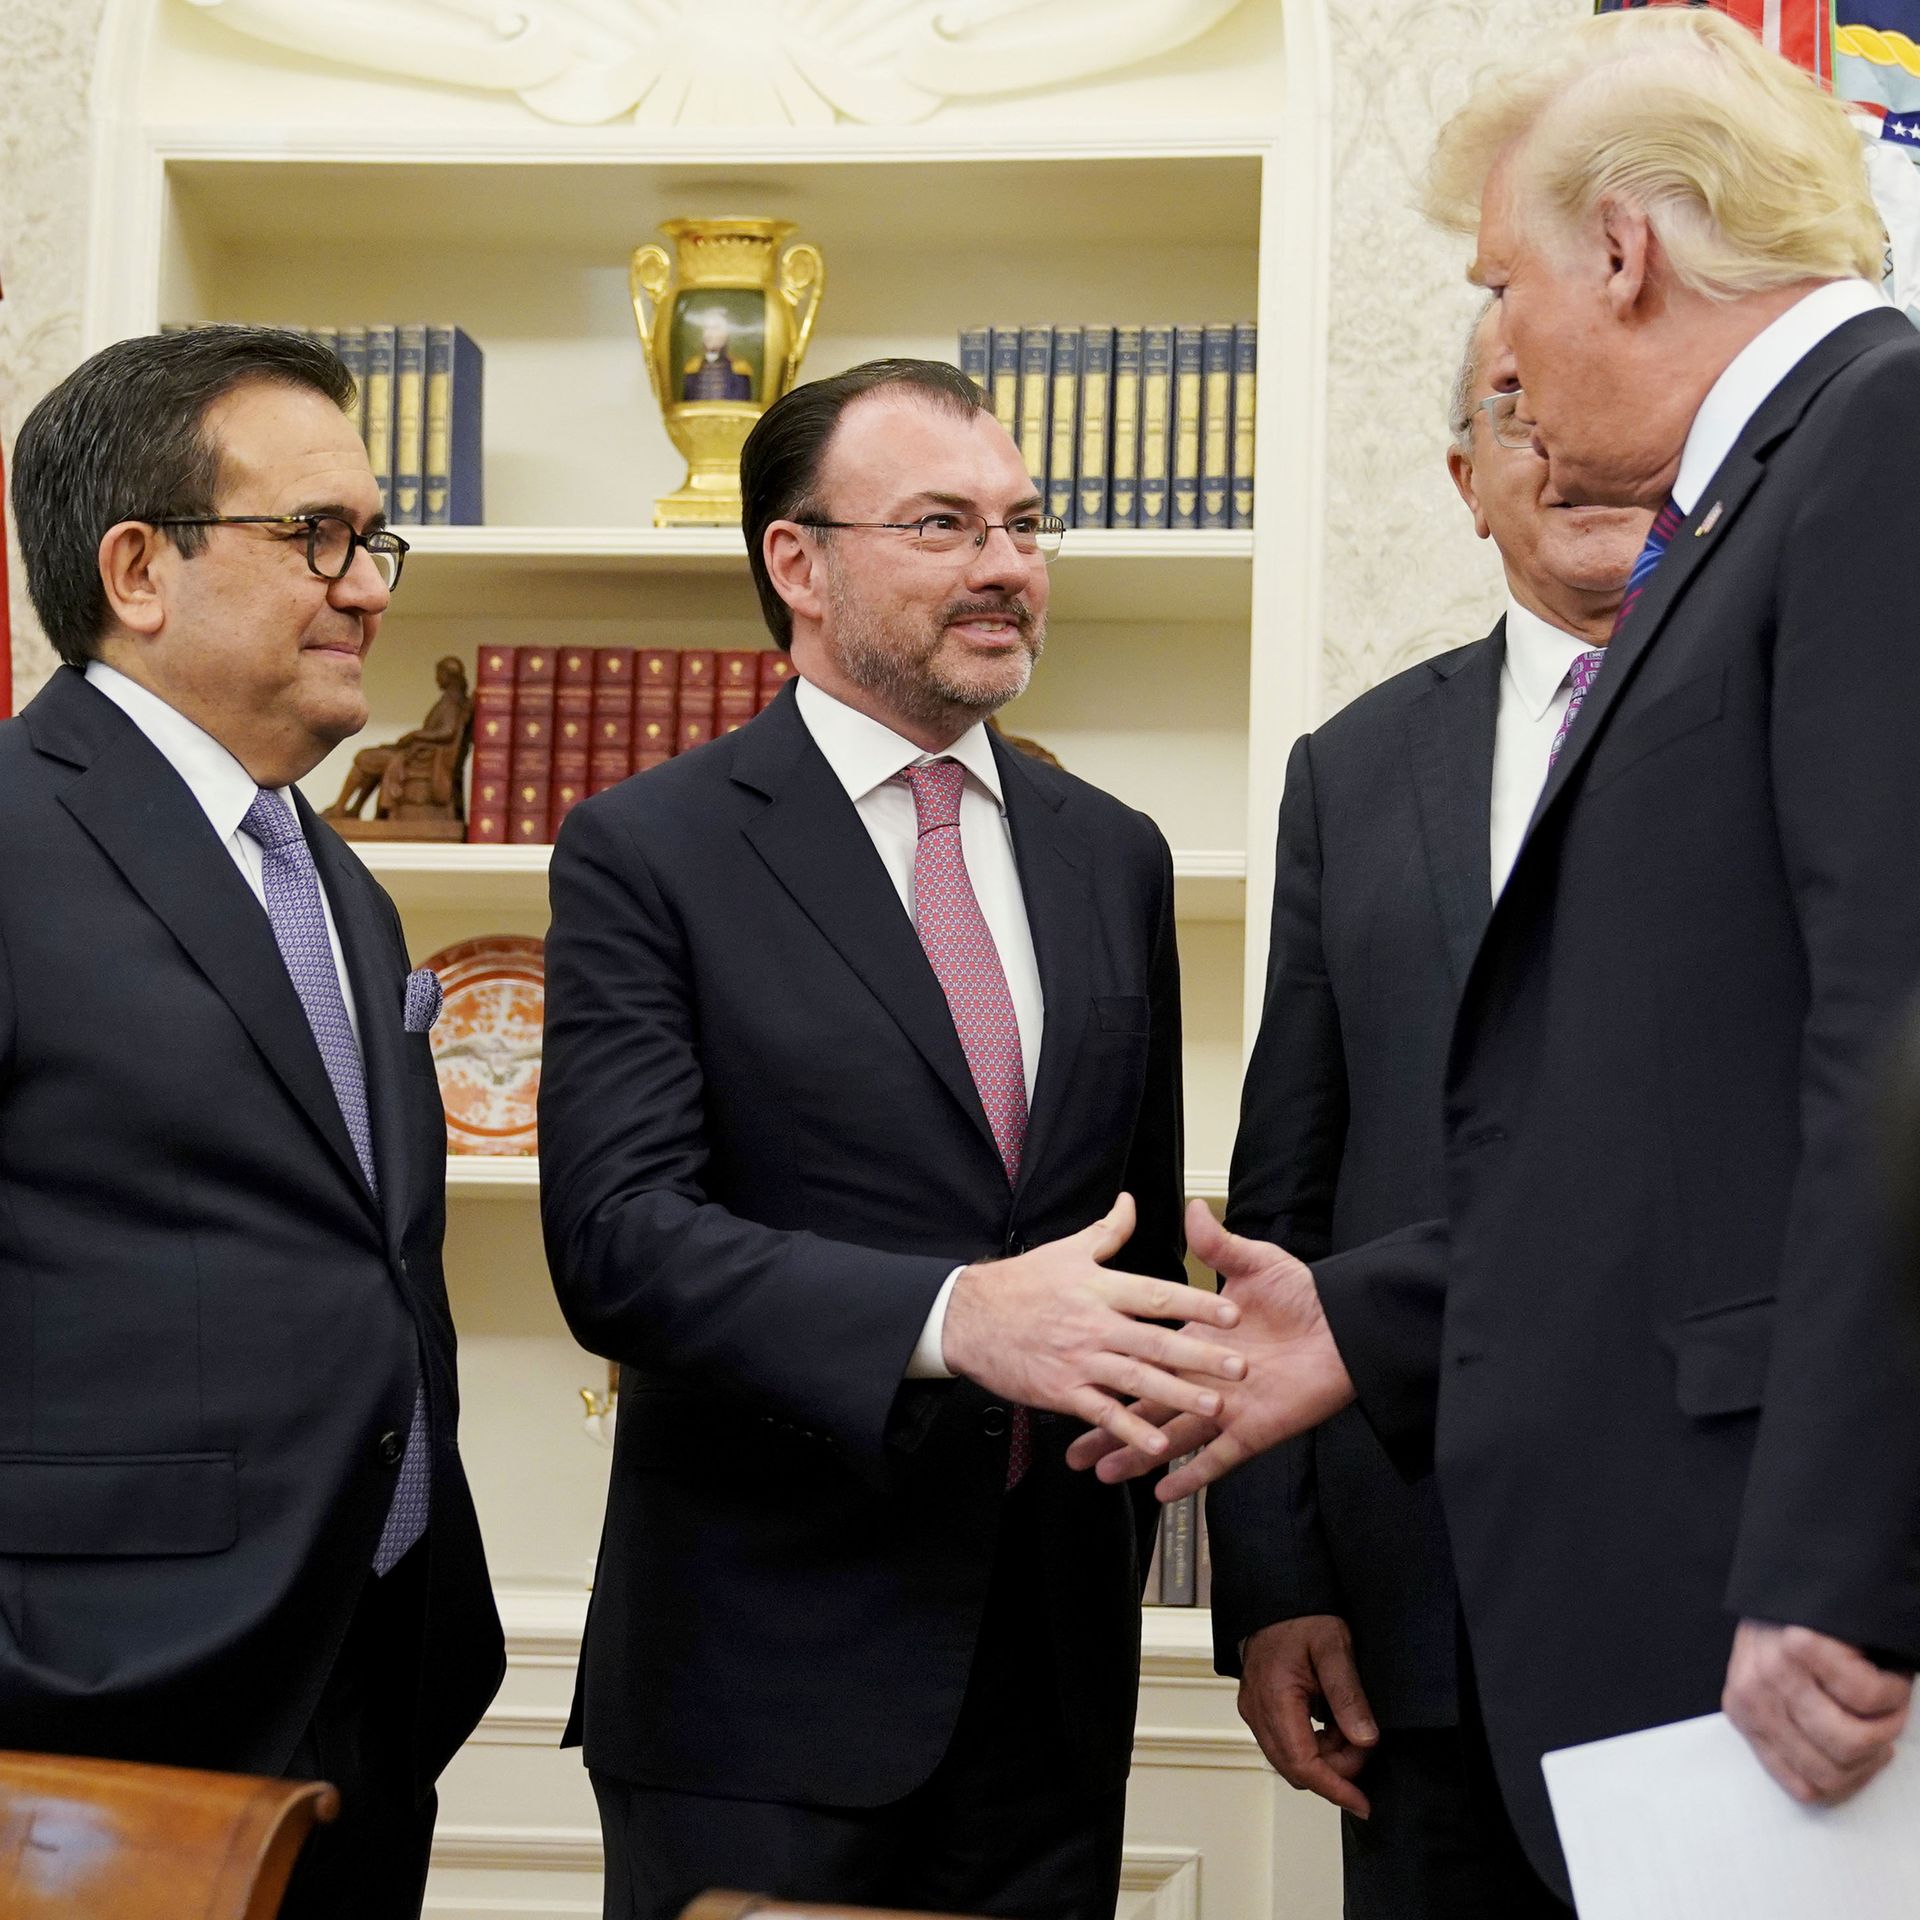 US President Donald Trump shakes hands with Mexico's Foreign Minister Luis Videgaray Caso as he arrives to speak on trade in the Oval Office.